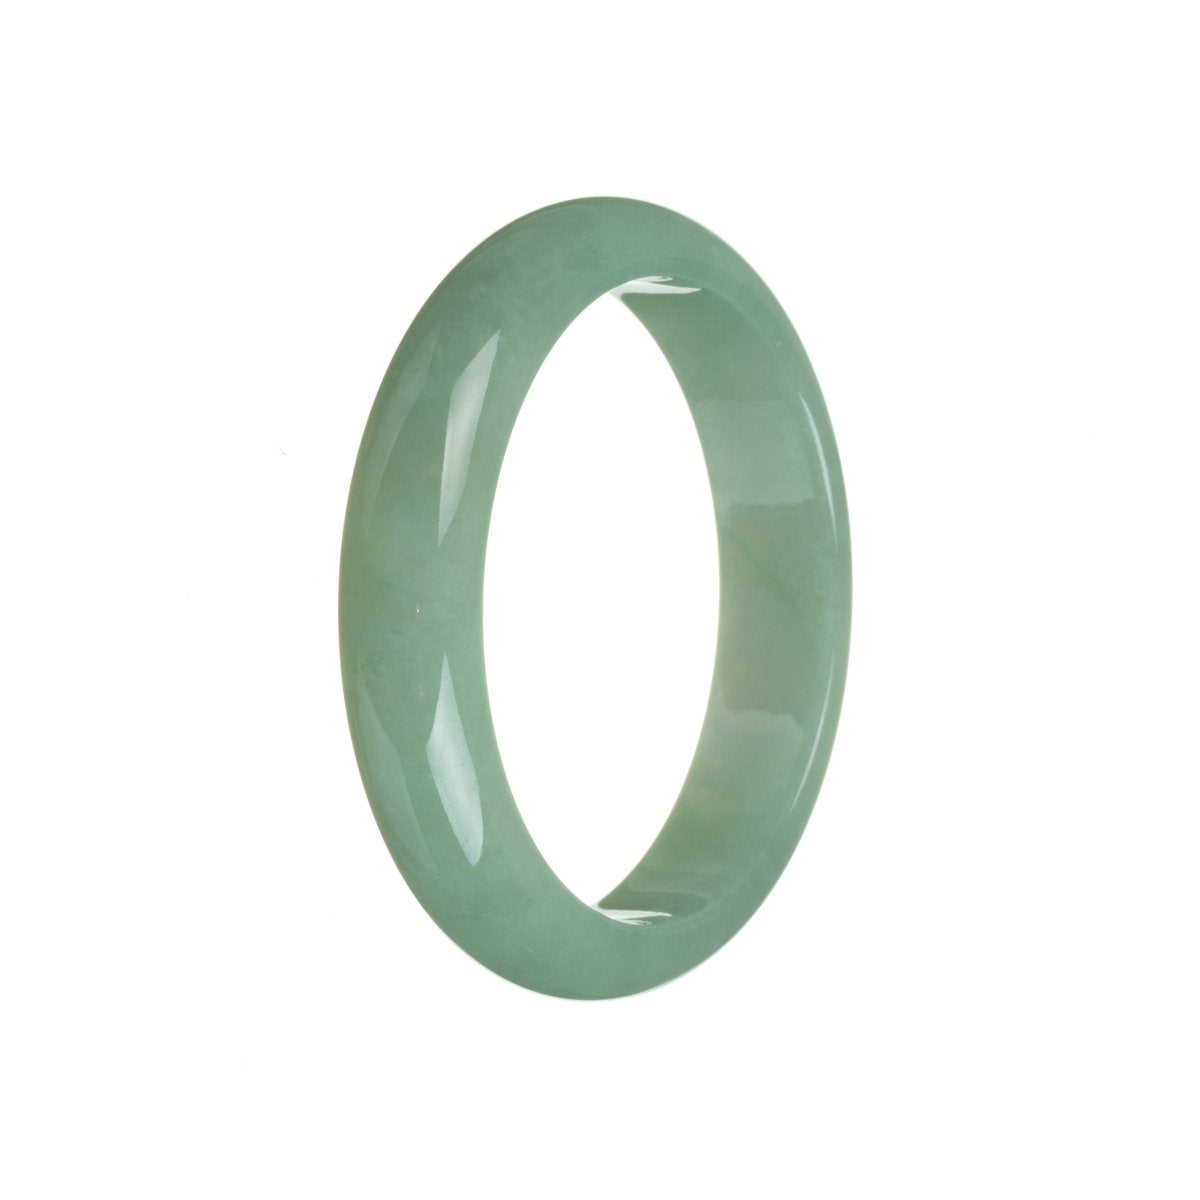 A half moon-shaped green jade bangle bracelet, crafted from genuine Grade A traditional jade. Perfect for adding a touch of elegance to any outfit.